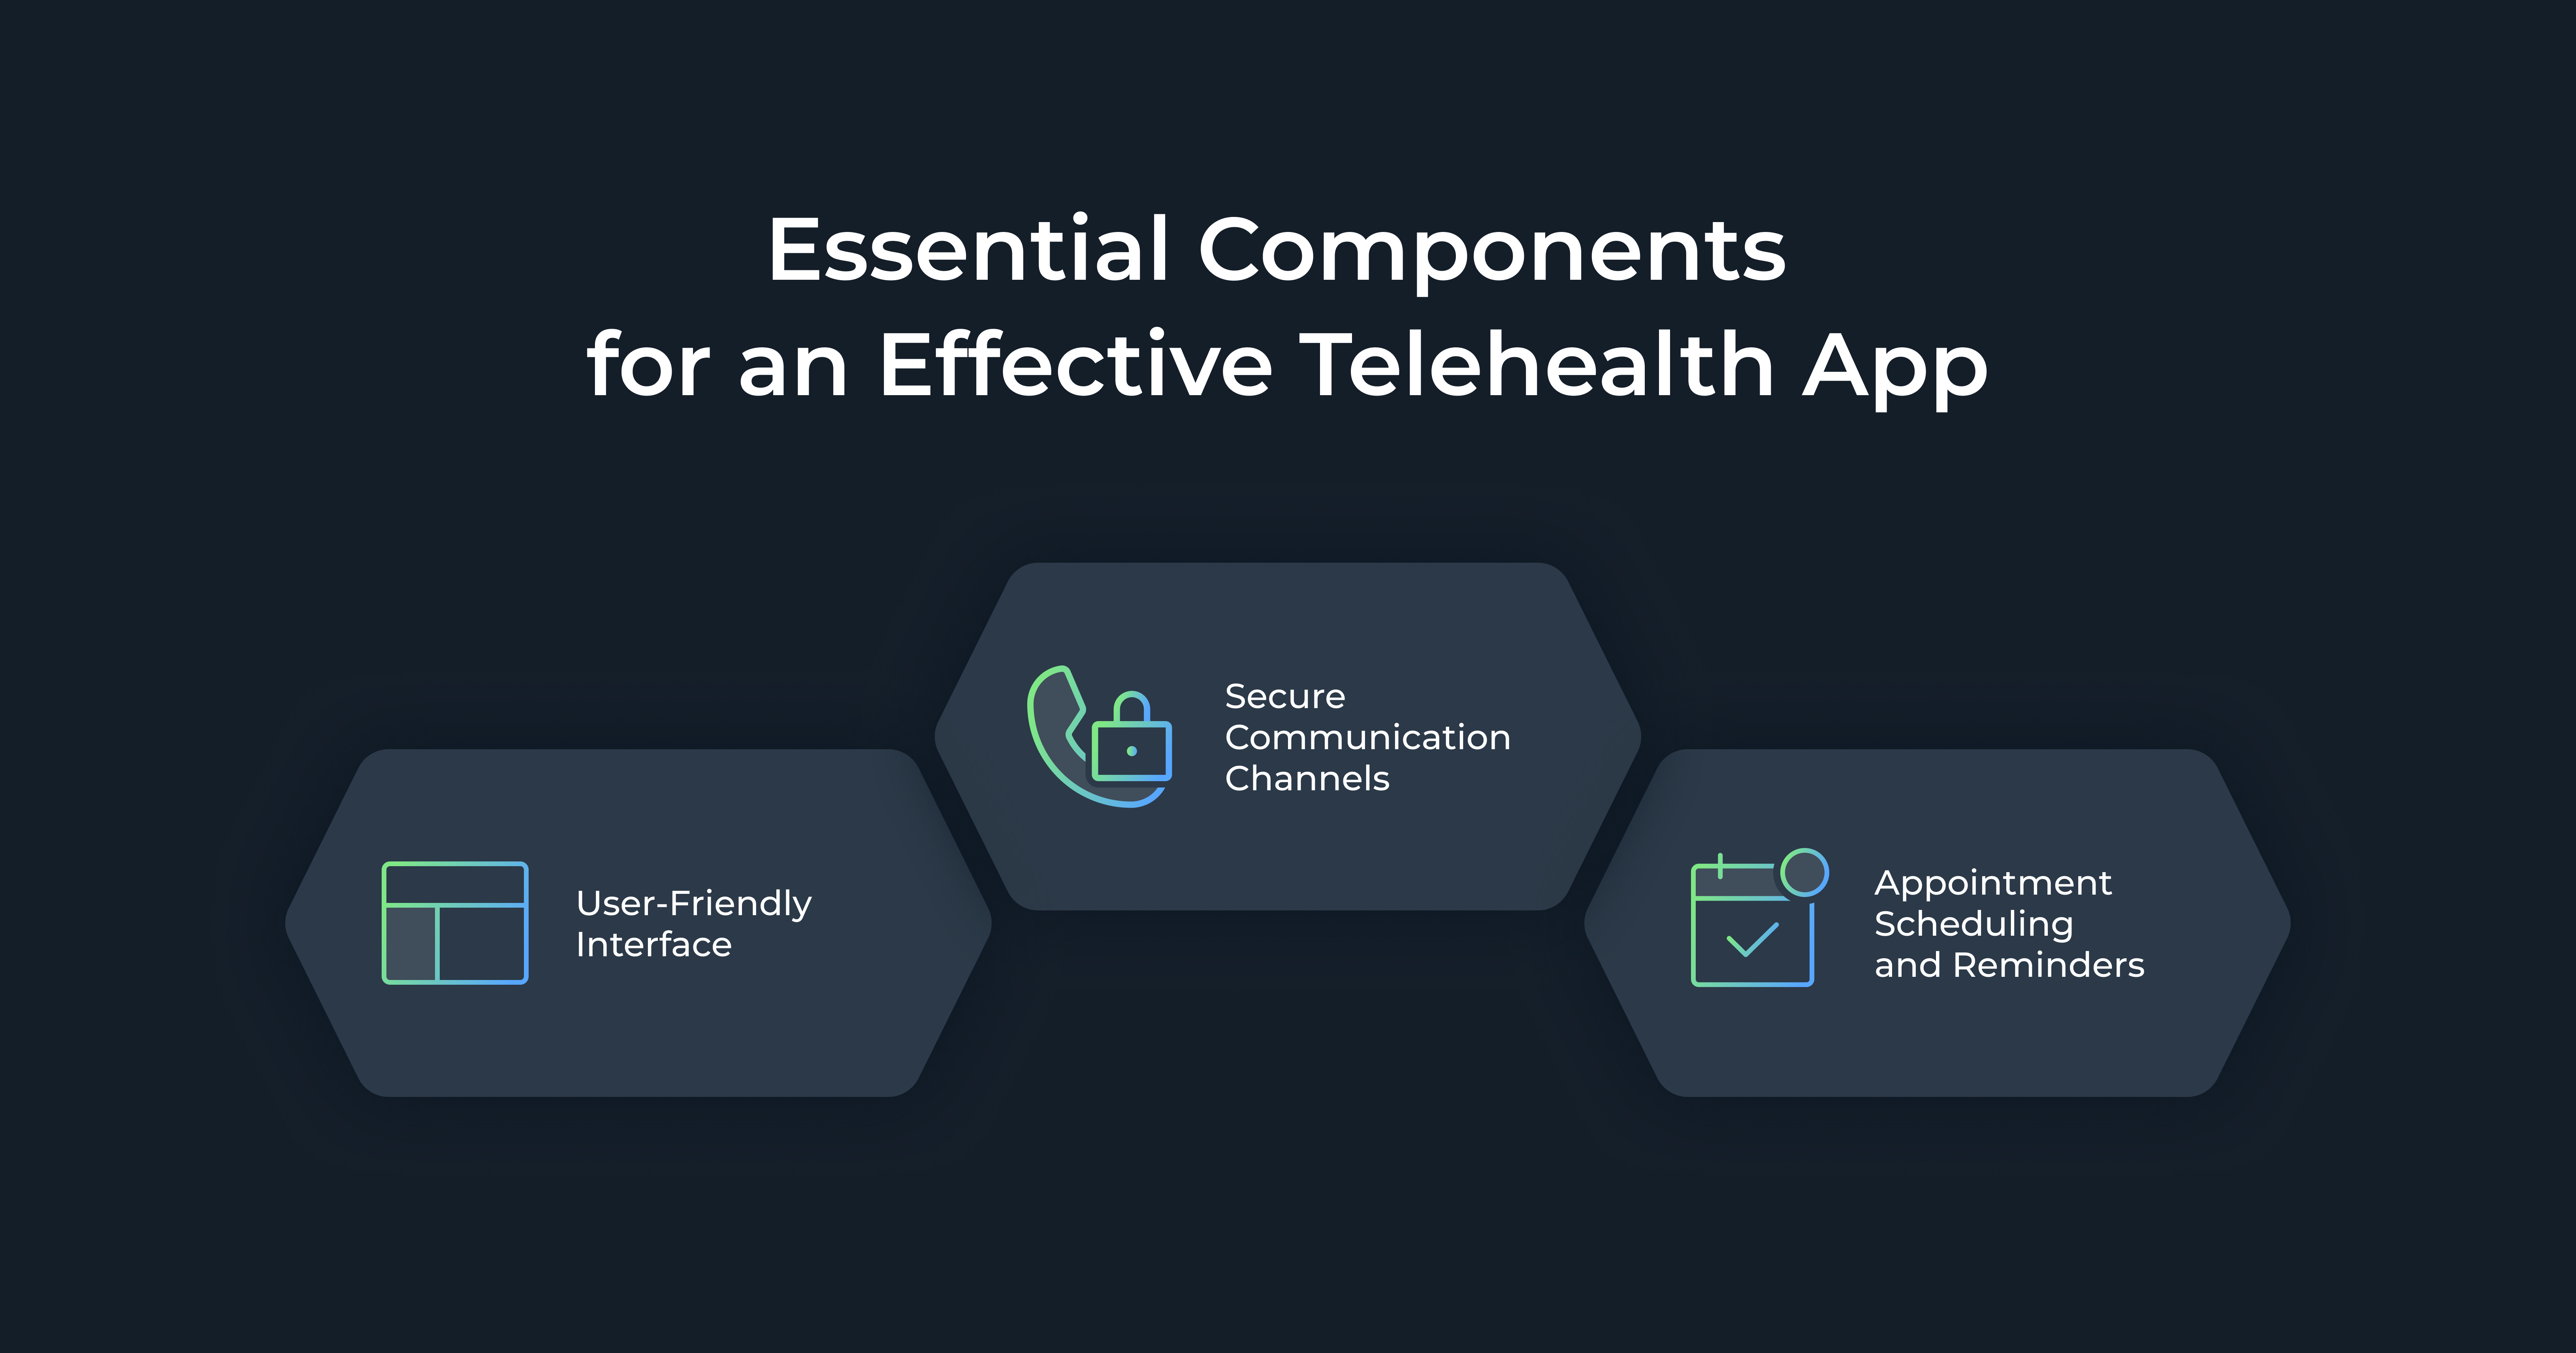 Essential Components for an Effective Telehealth App: User-Friendly Interface, Secure Communication Channels, Appointment Scheduling and Reminders
